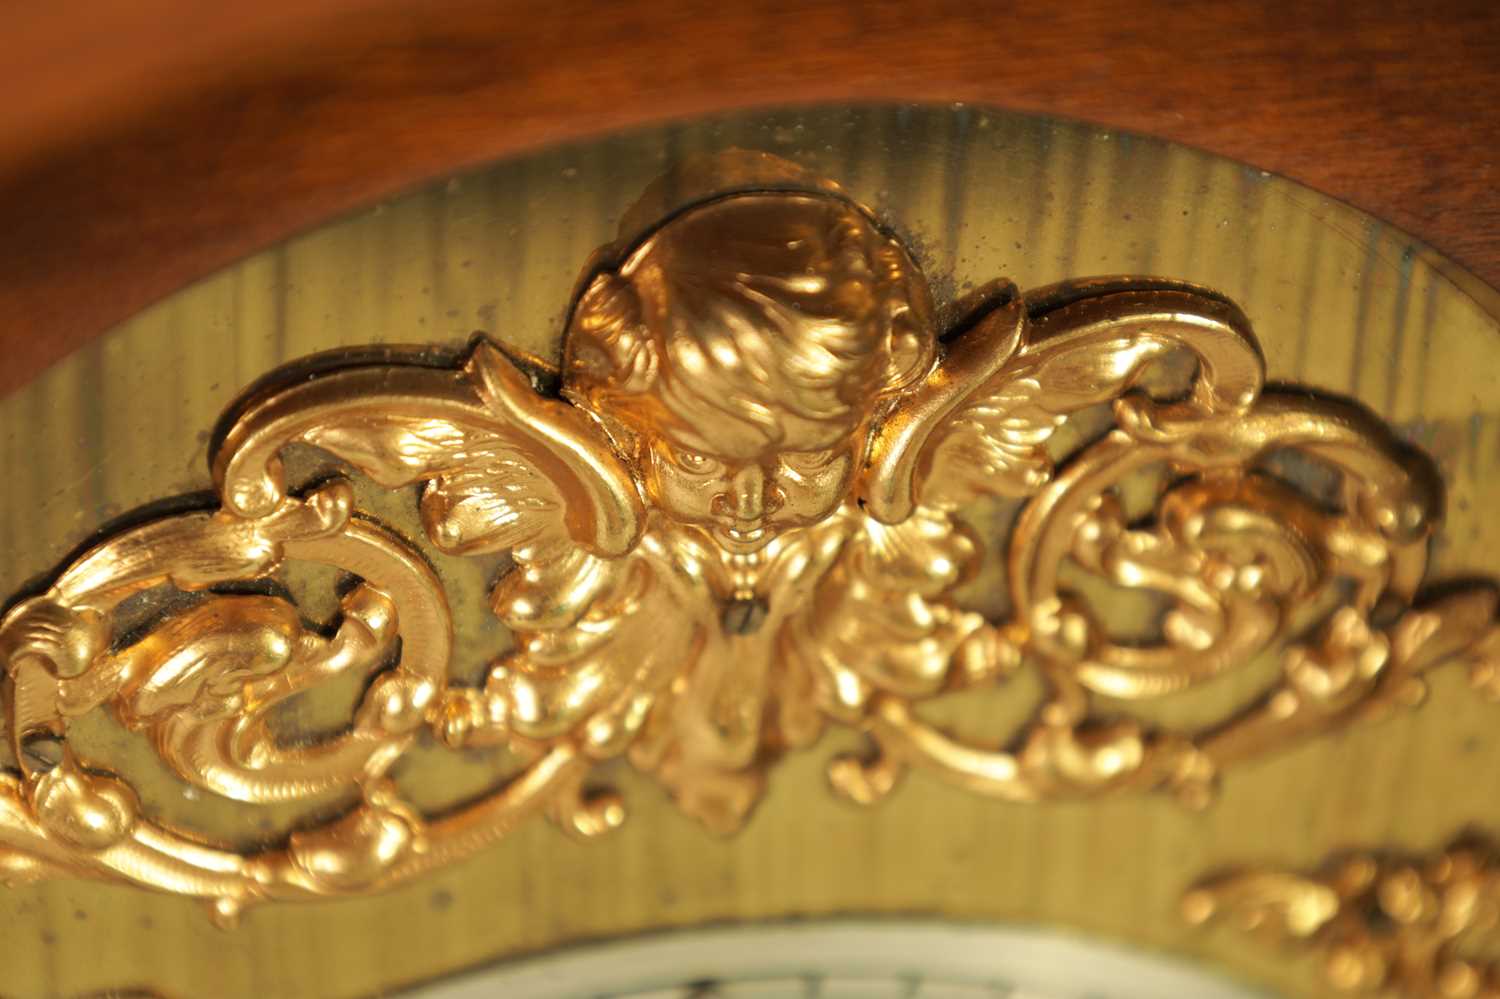 A LATE 19TH CENTURY GERMAN JUNGHANS WALNUT MANTEL CLOCK - Image 7 of 13